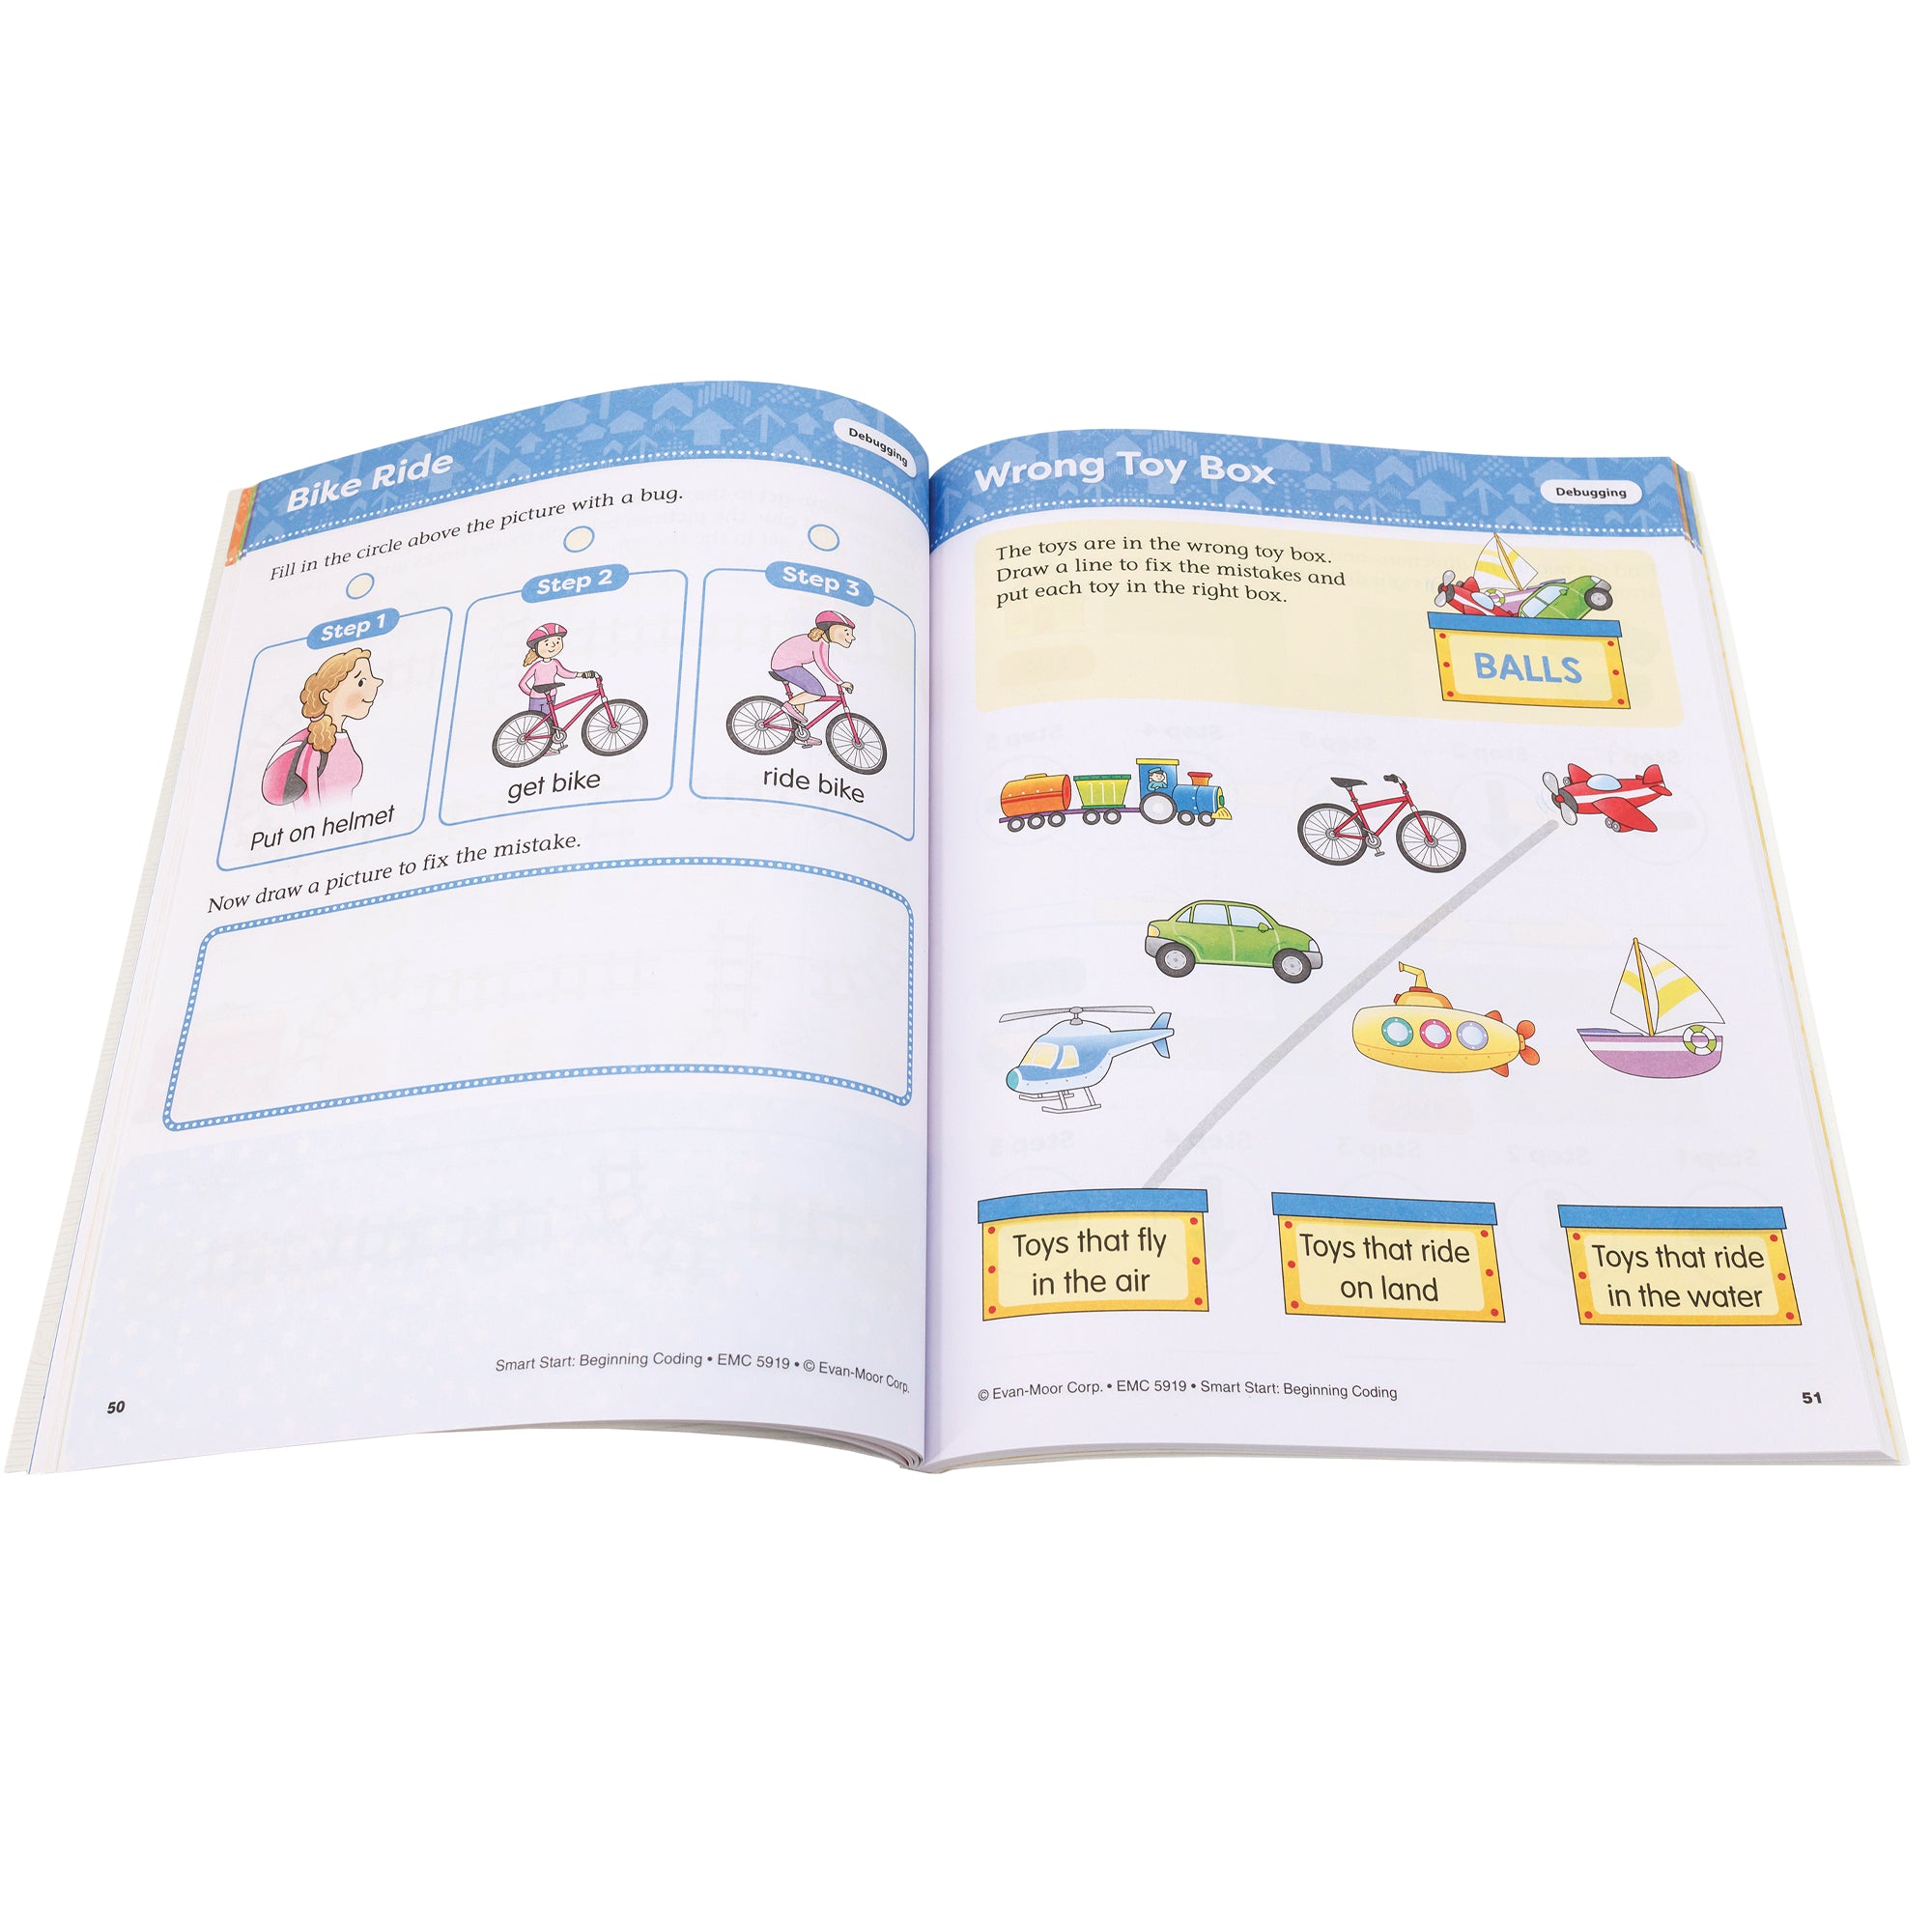 Smart Start Beginning Coding book open to show inside pages. The white pages have a blue top border with titles inside. The left page, titled “Bike Ride,” shows 3 steps of illustrations of a girl putting on her helmet, getting a bike, and riding the bike. You are to mark the picture with a mistake and draw the correction. The right page, titled “Wrong Toy Box,” shows several toys and toy boxes. You are directed to draw a line from the toy to the correctly labeled toy box.